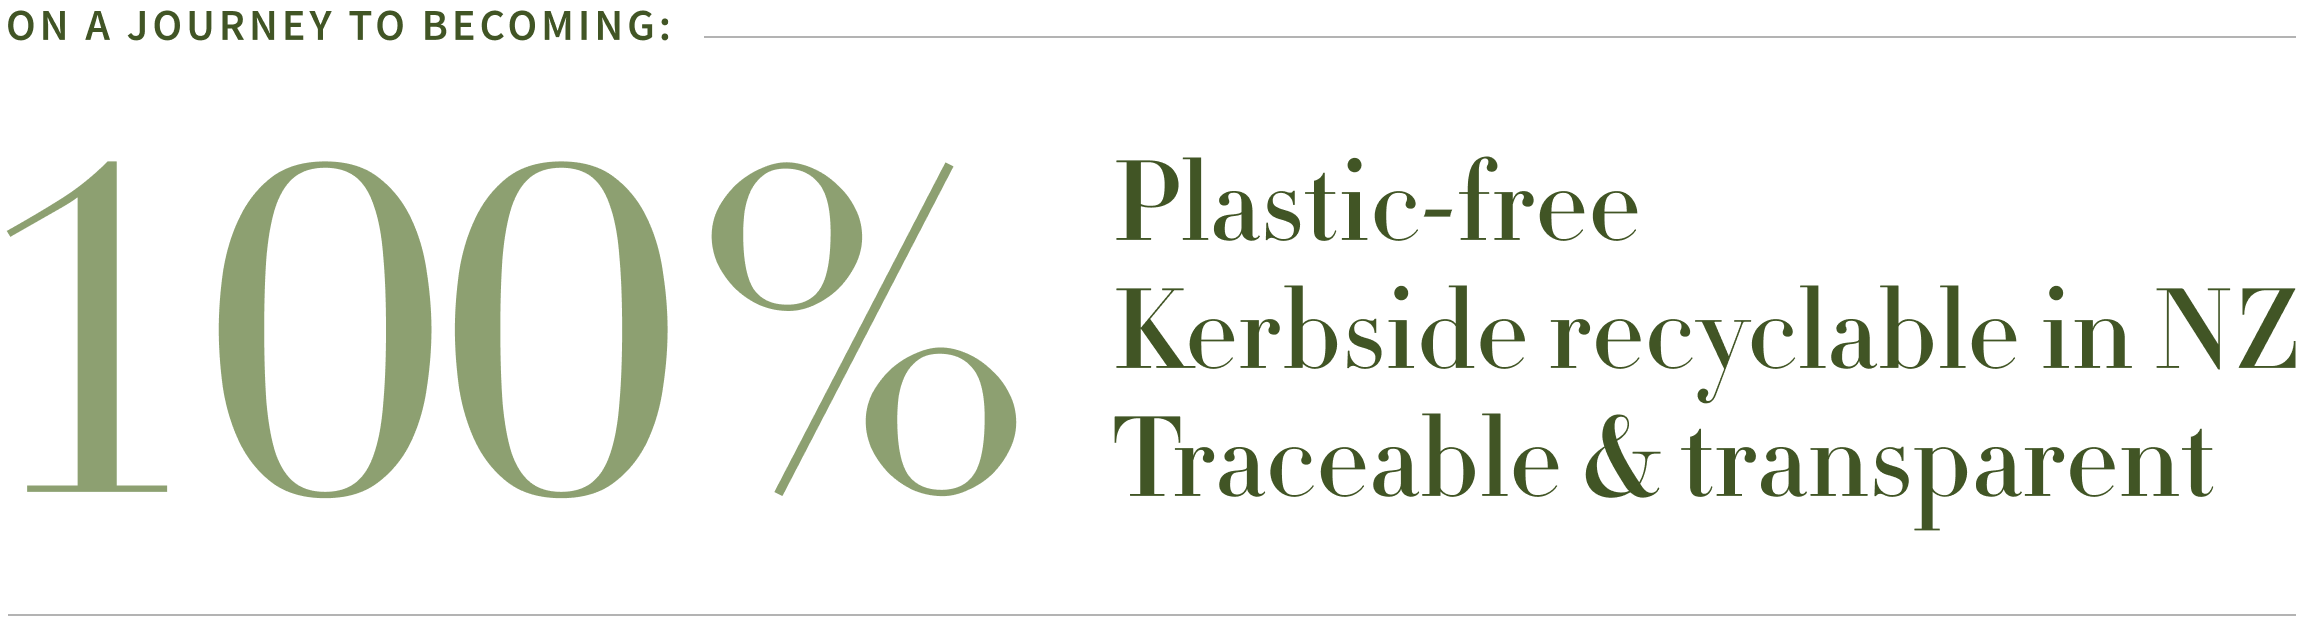 plastic free, kerbside recyclable in NZ, traceable & transparent